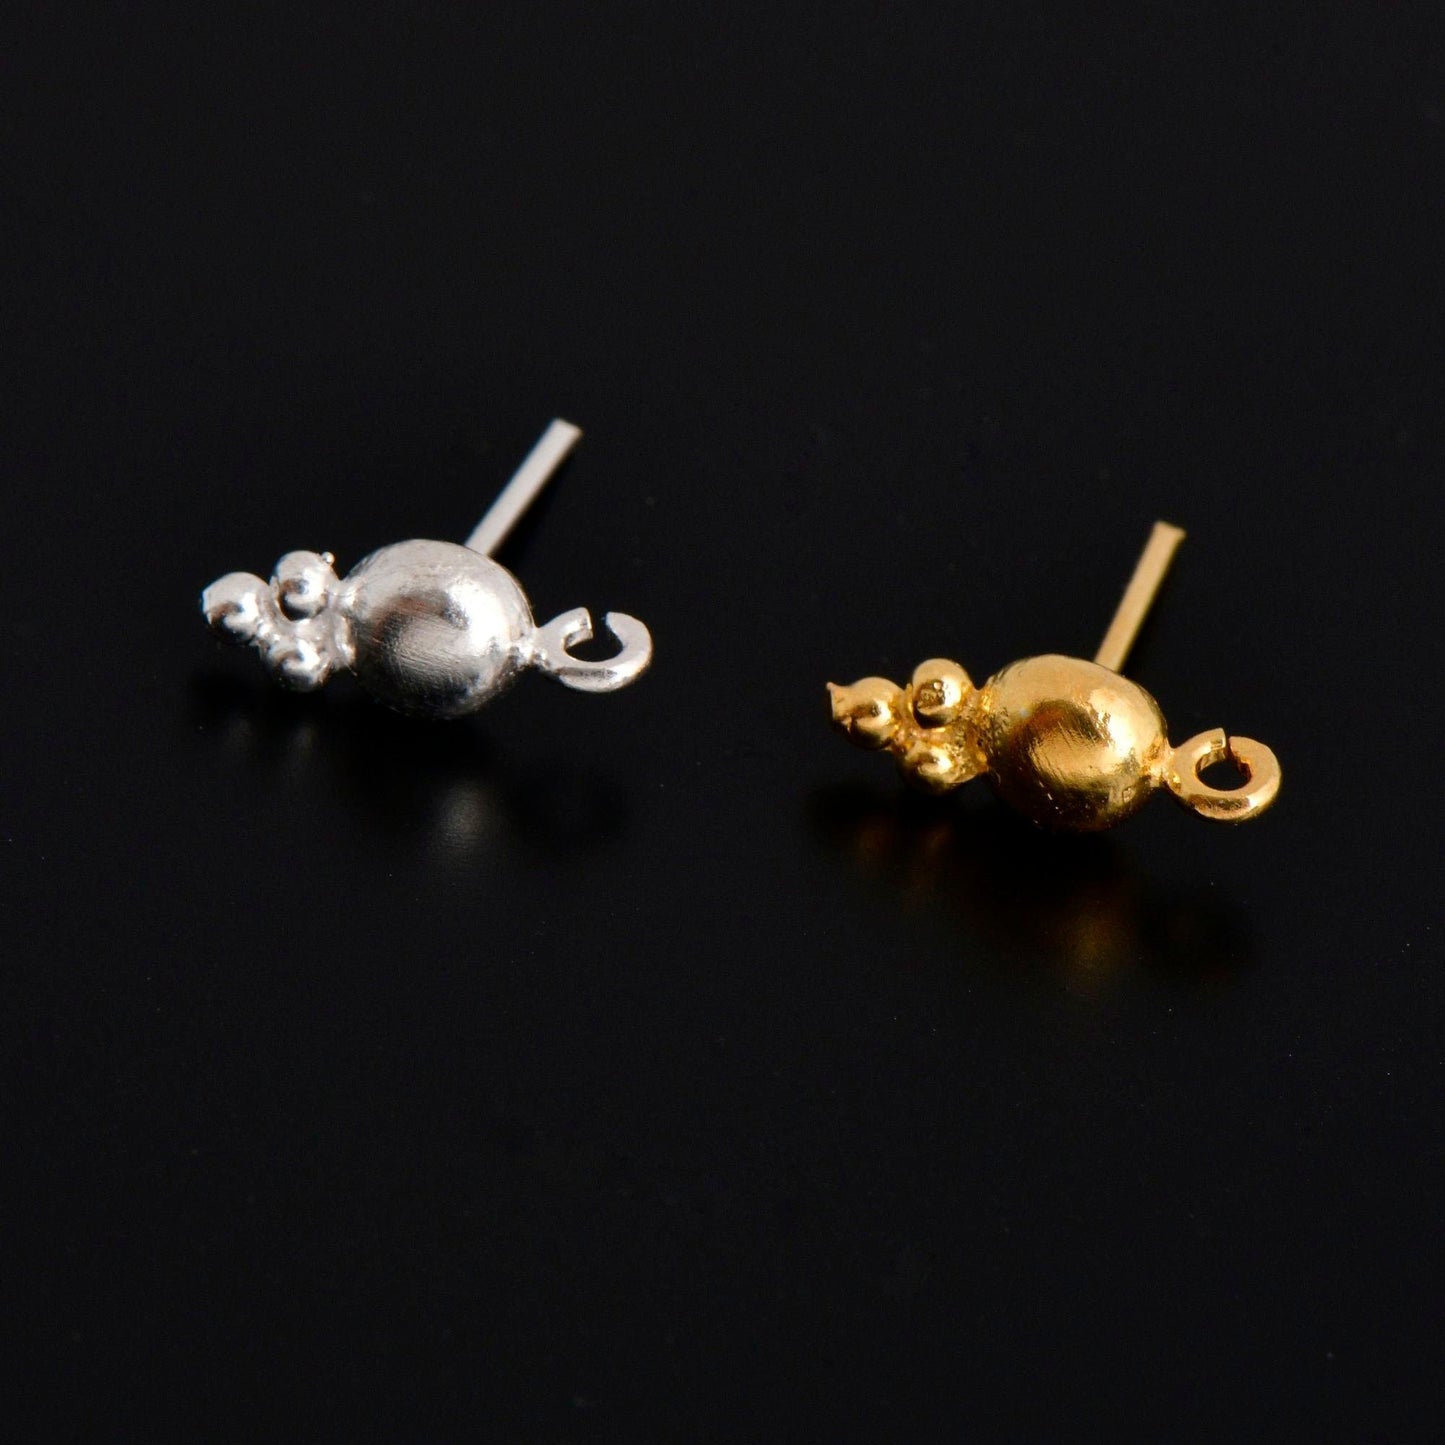 24K Gold Vermeil  Ball Ear Post, Round Ball Ear Posts with Loop, Solid Silver Ball Shape Earring Posts, Jewelry Making Findings, S17V/ S17